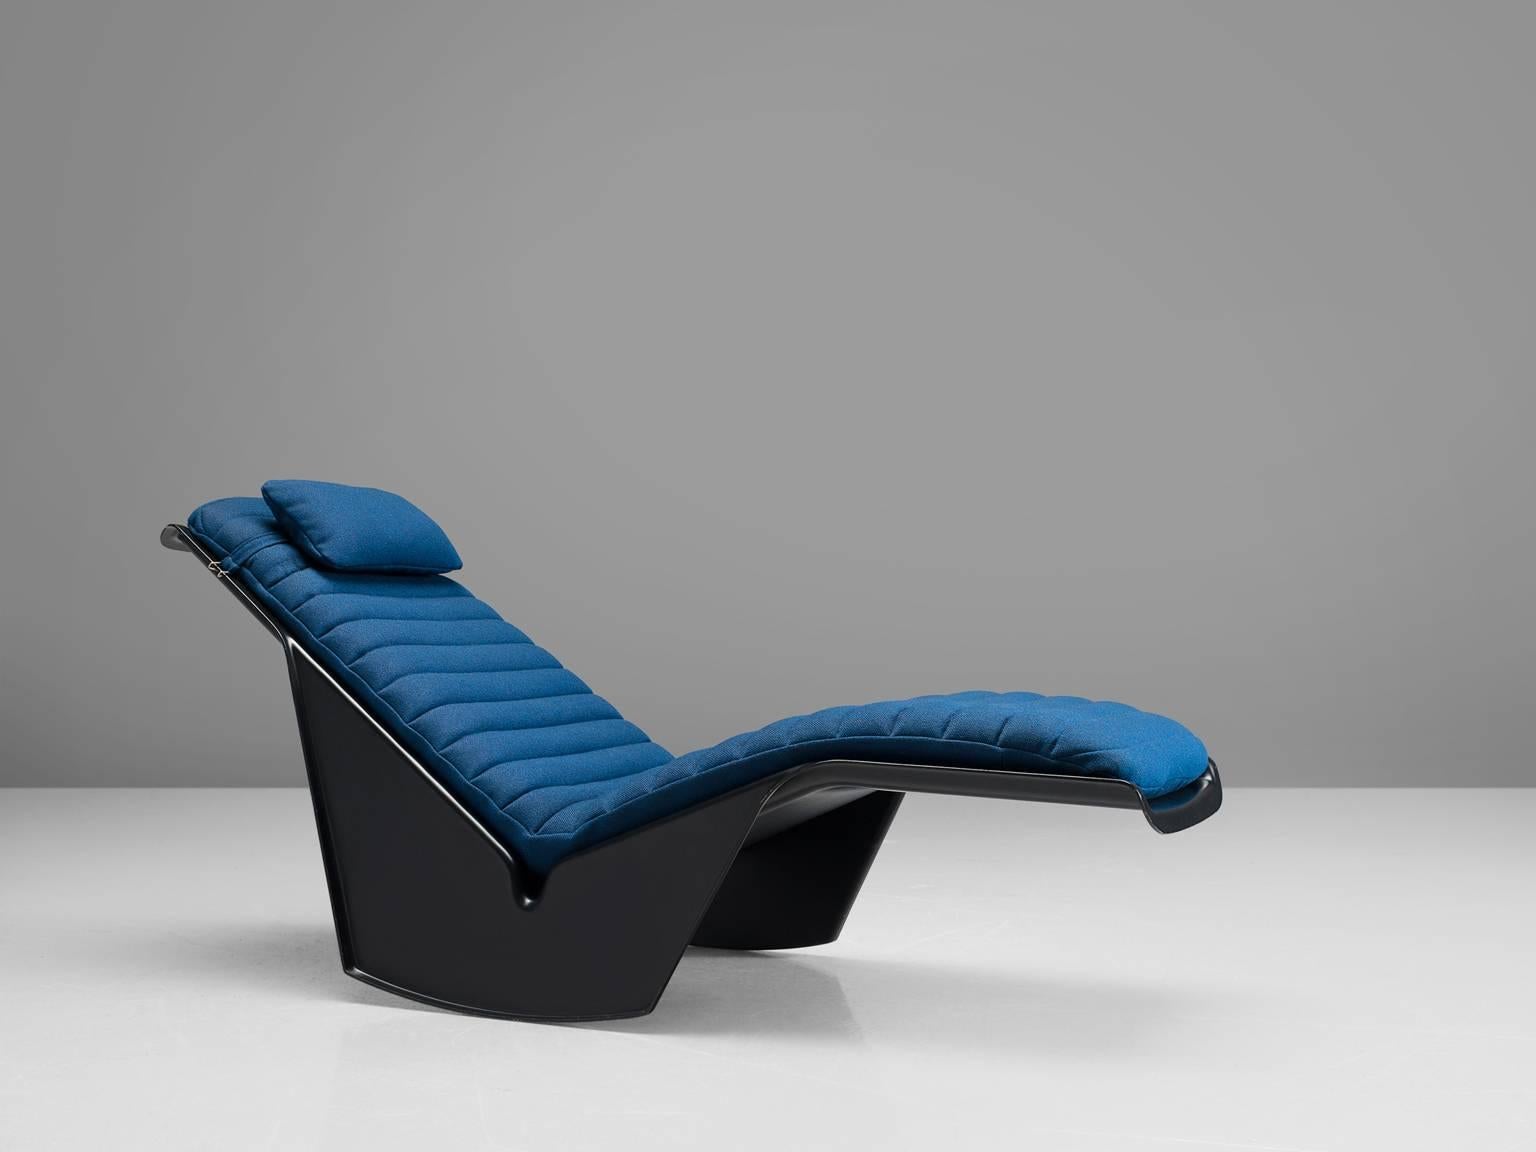 Burkhard Vogtherr for Rosenthal, 'Serpentina' daybed, blue fabric, black fiberglass, Germany, 1976.

This serpentine lounge chair was designed by Burkhard Vogtherr and is part of the midcentury design collection. The rocking chair is produced by